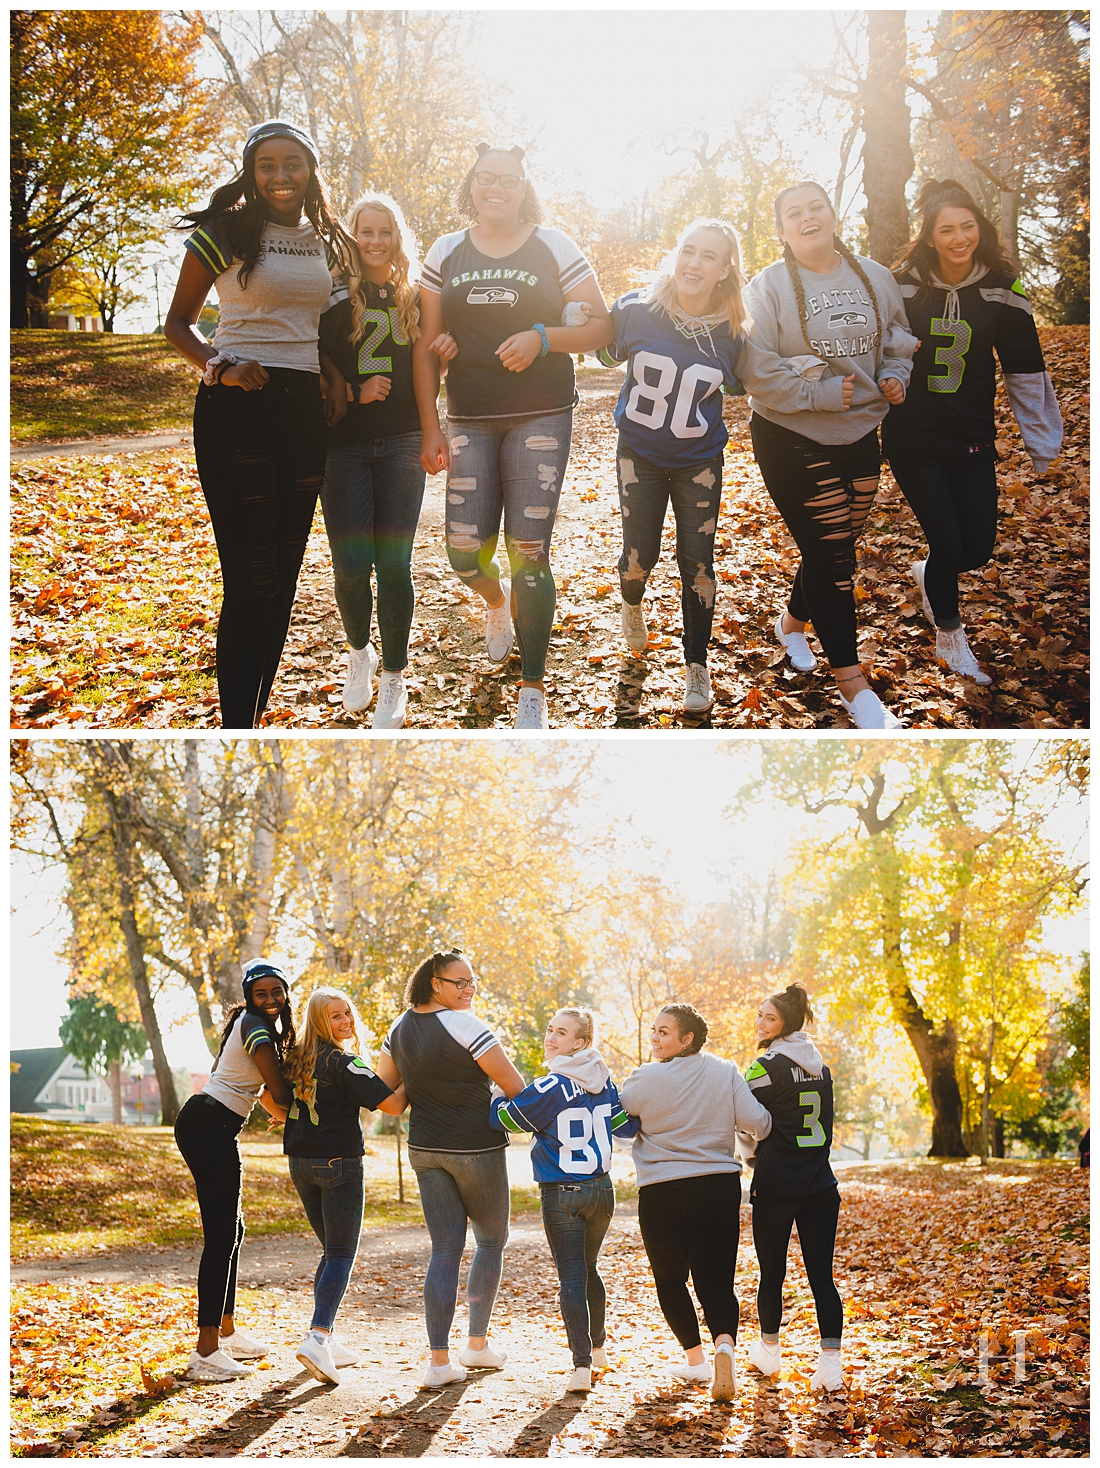 Sunny Park Portraits in Tacoma for Seahawks Themed Portrait Session photographed by Amanda Howse